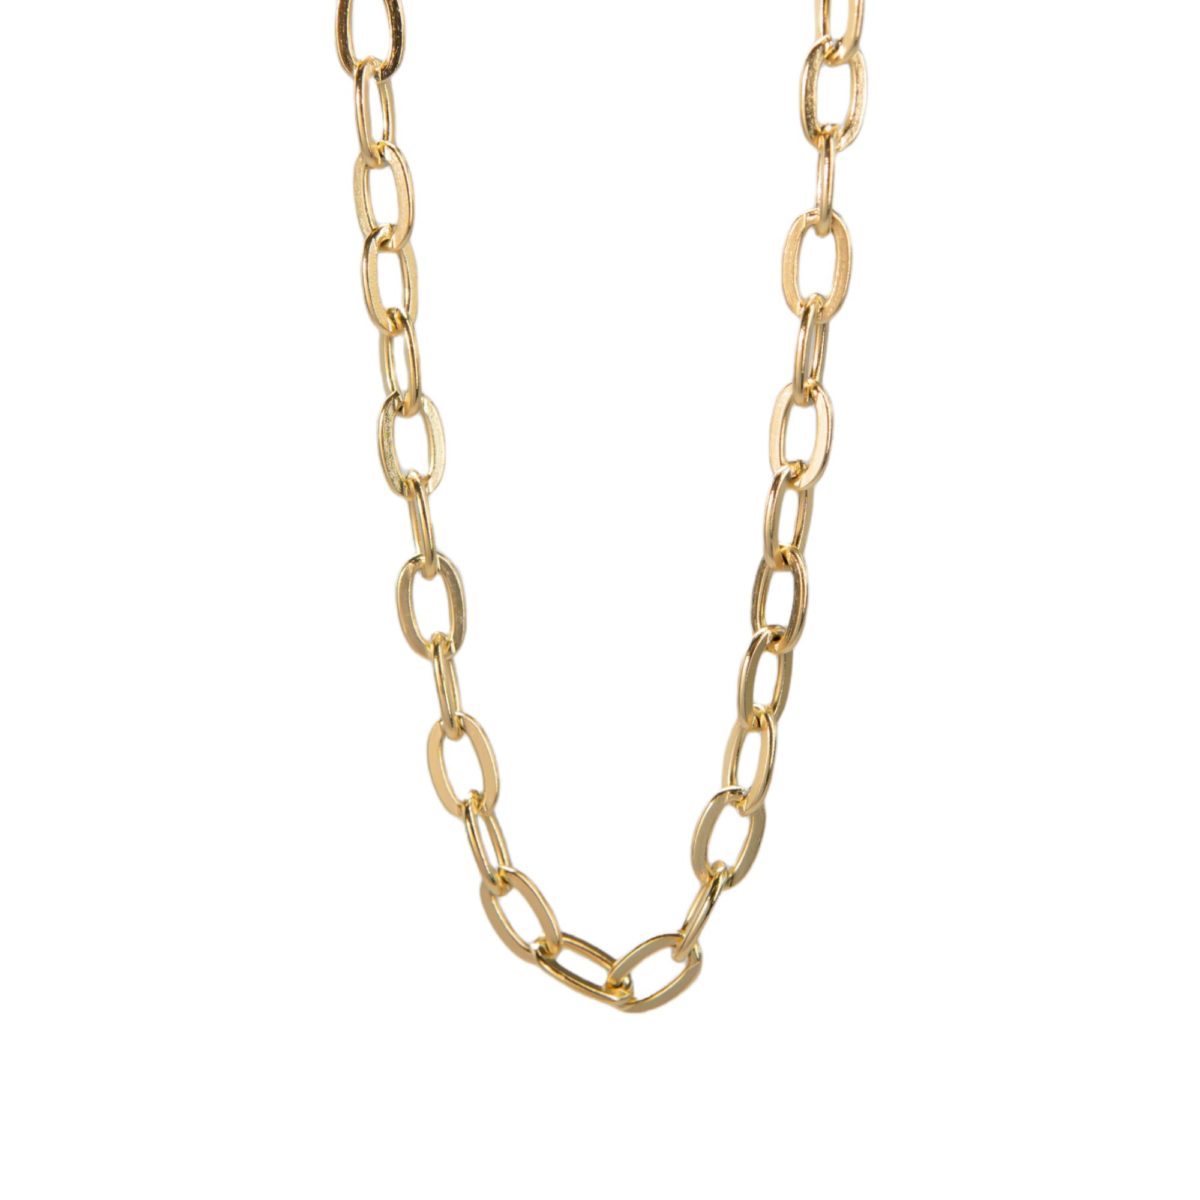 https://m.clubbella.co/product/tina-gold-chain-necklace/ Tina Gold Chain Necklace (1)